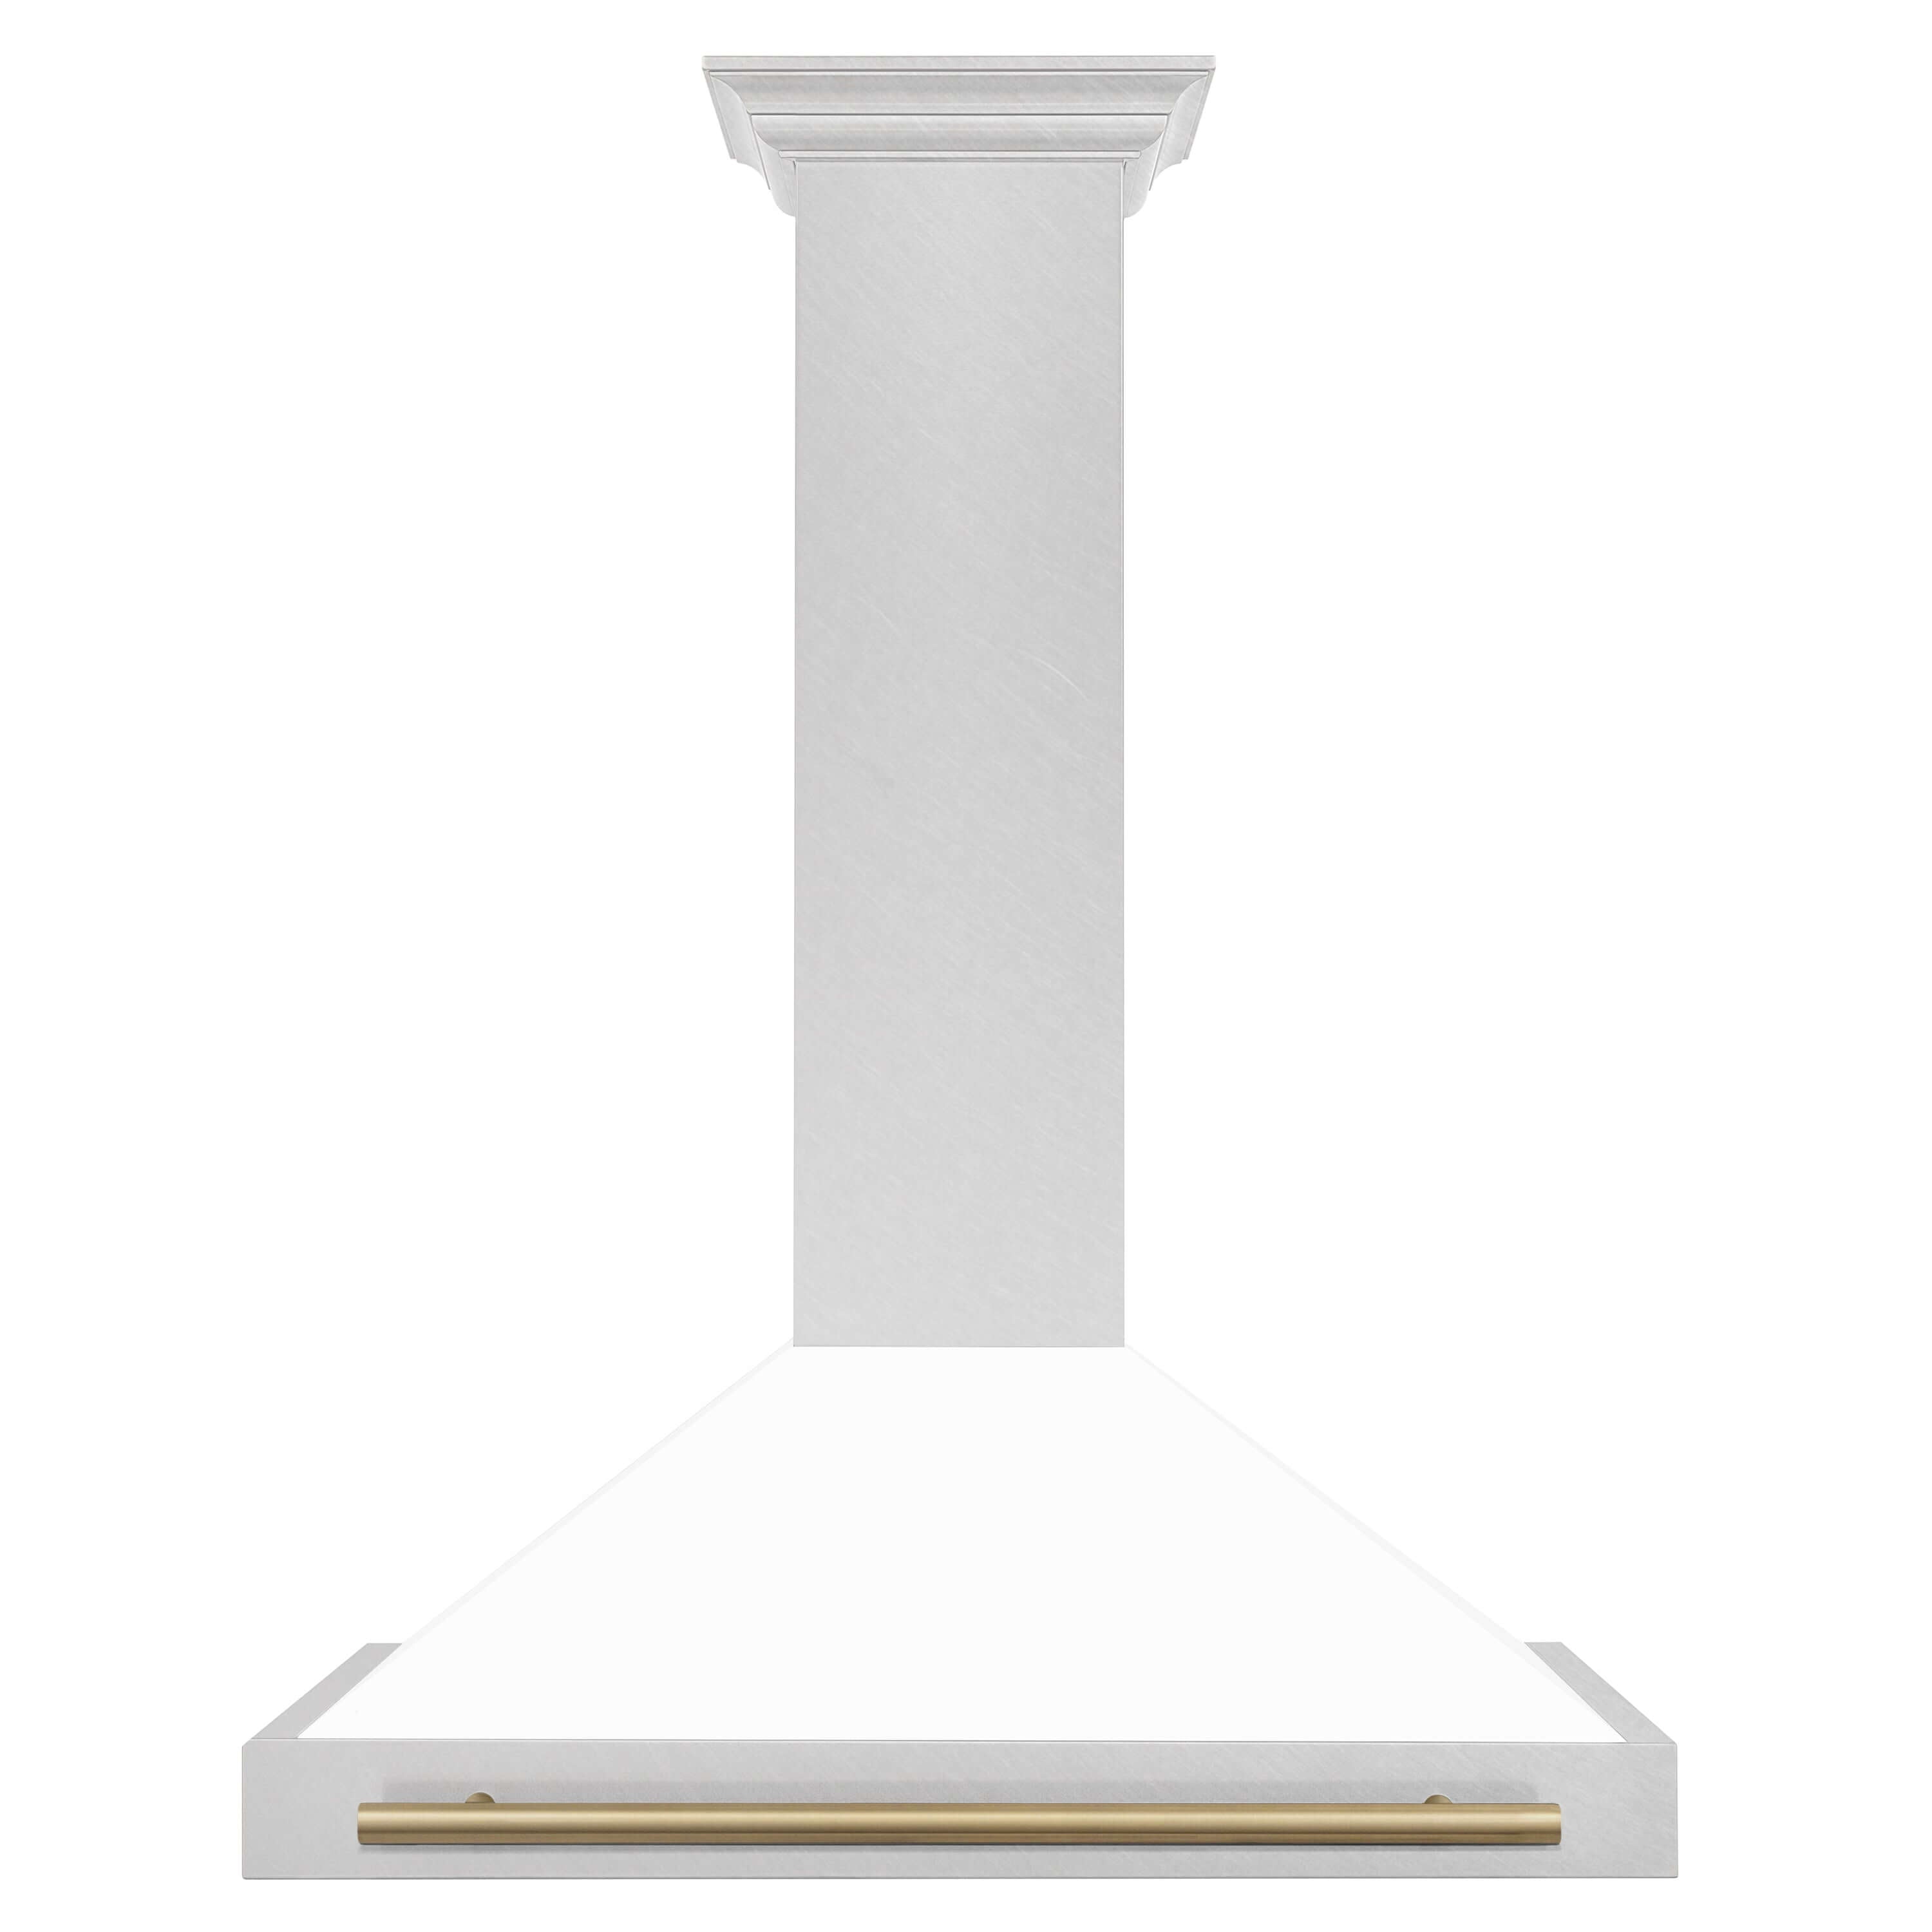 ZLINE 36 in. Autograph Edition in Fingerprint Resistant Stainless Steel Range Hood with White Matte Shell with Champagne Bronze Handle Front View